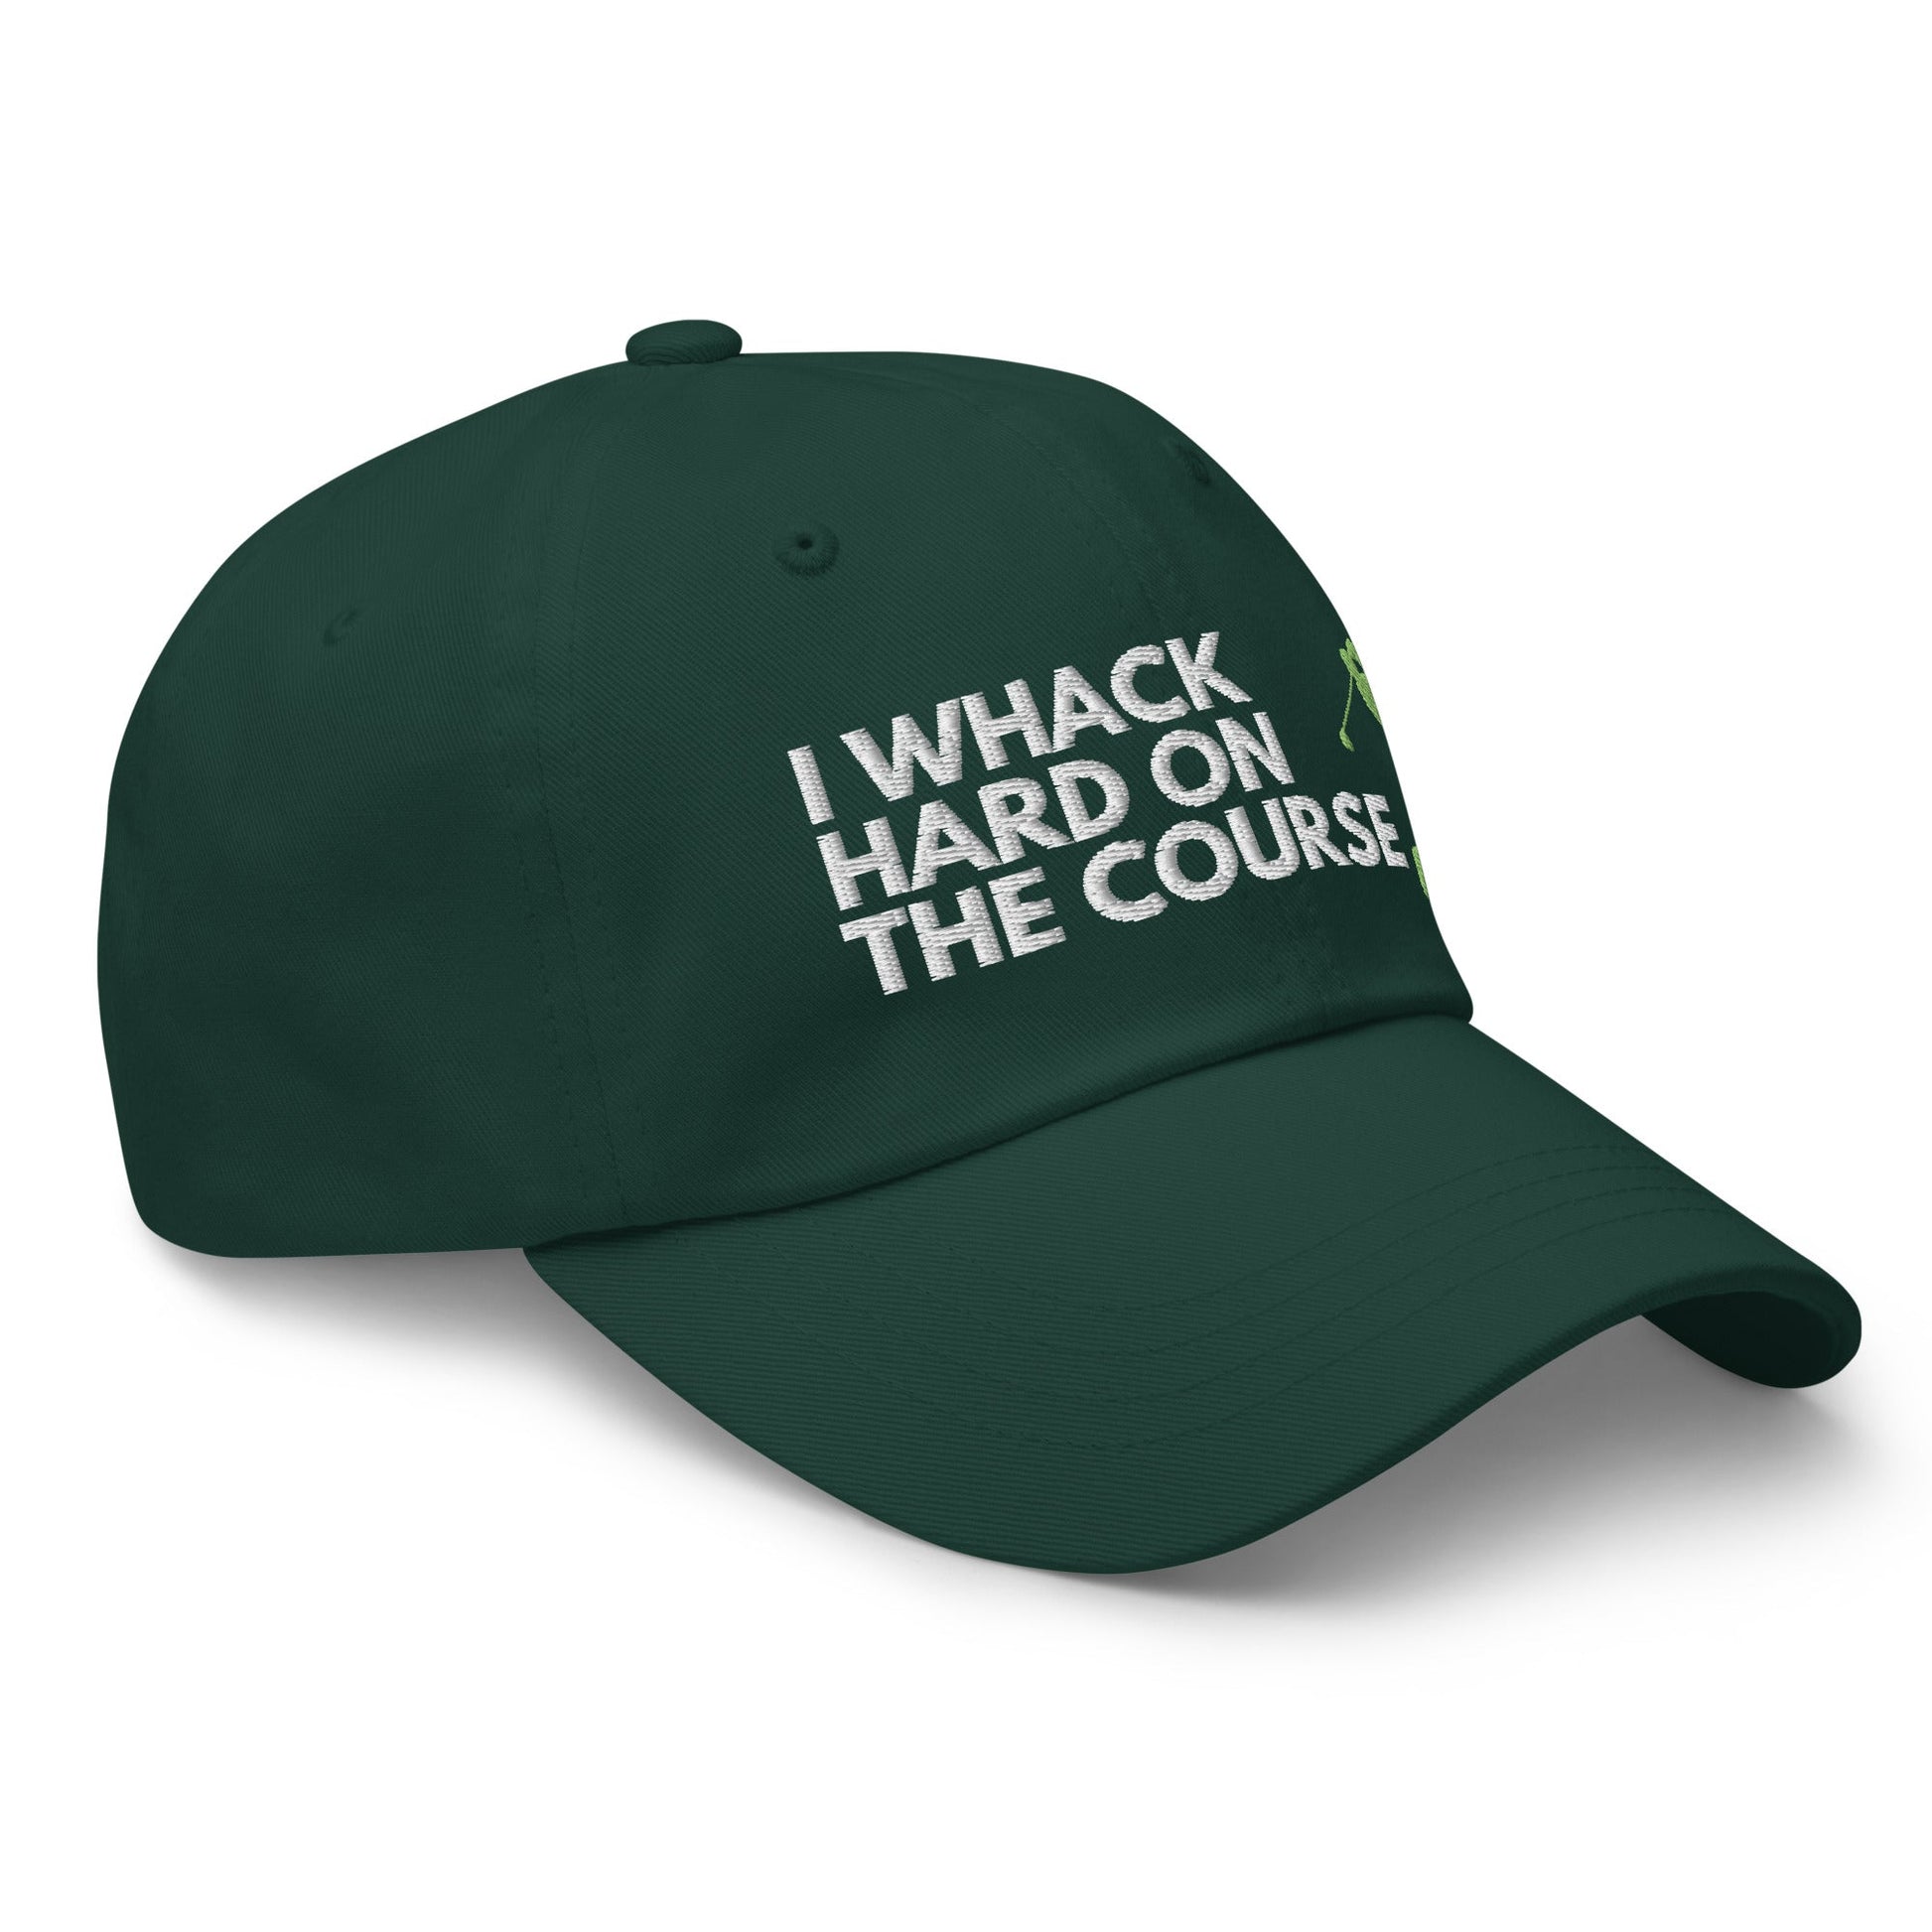 Funny Golfer Gifts  Dad Cap Spruce I Whack Hard On The Course Cap